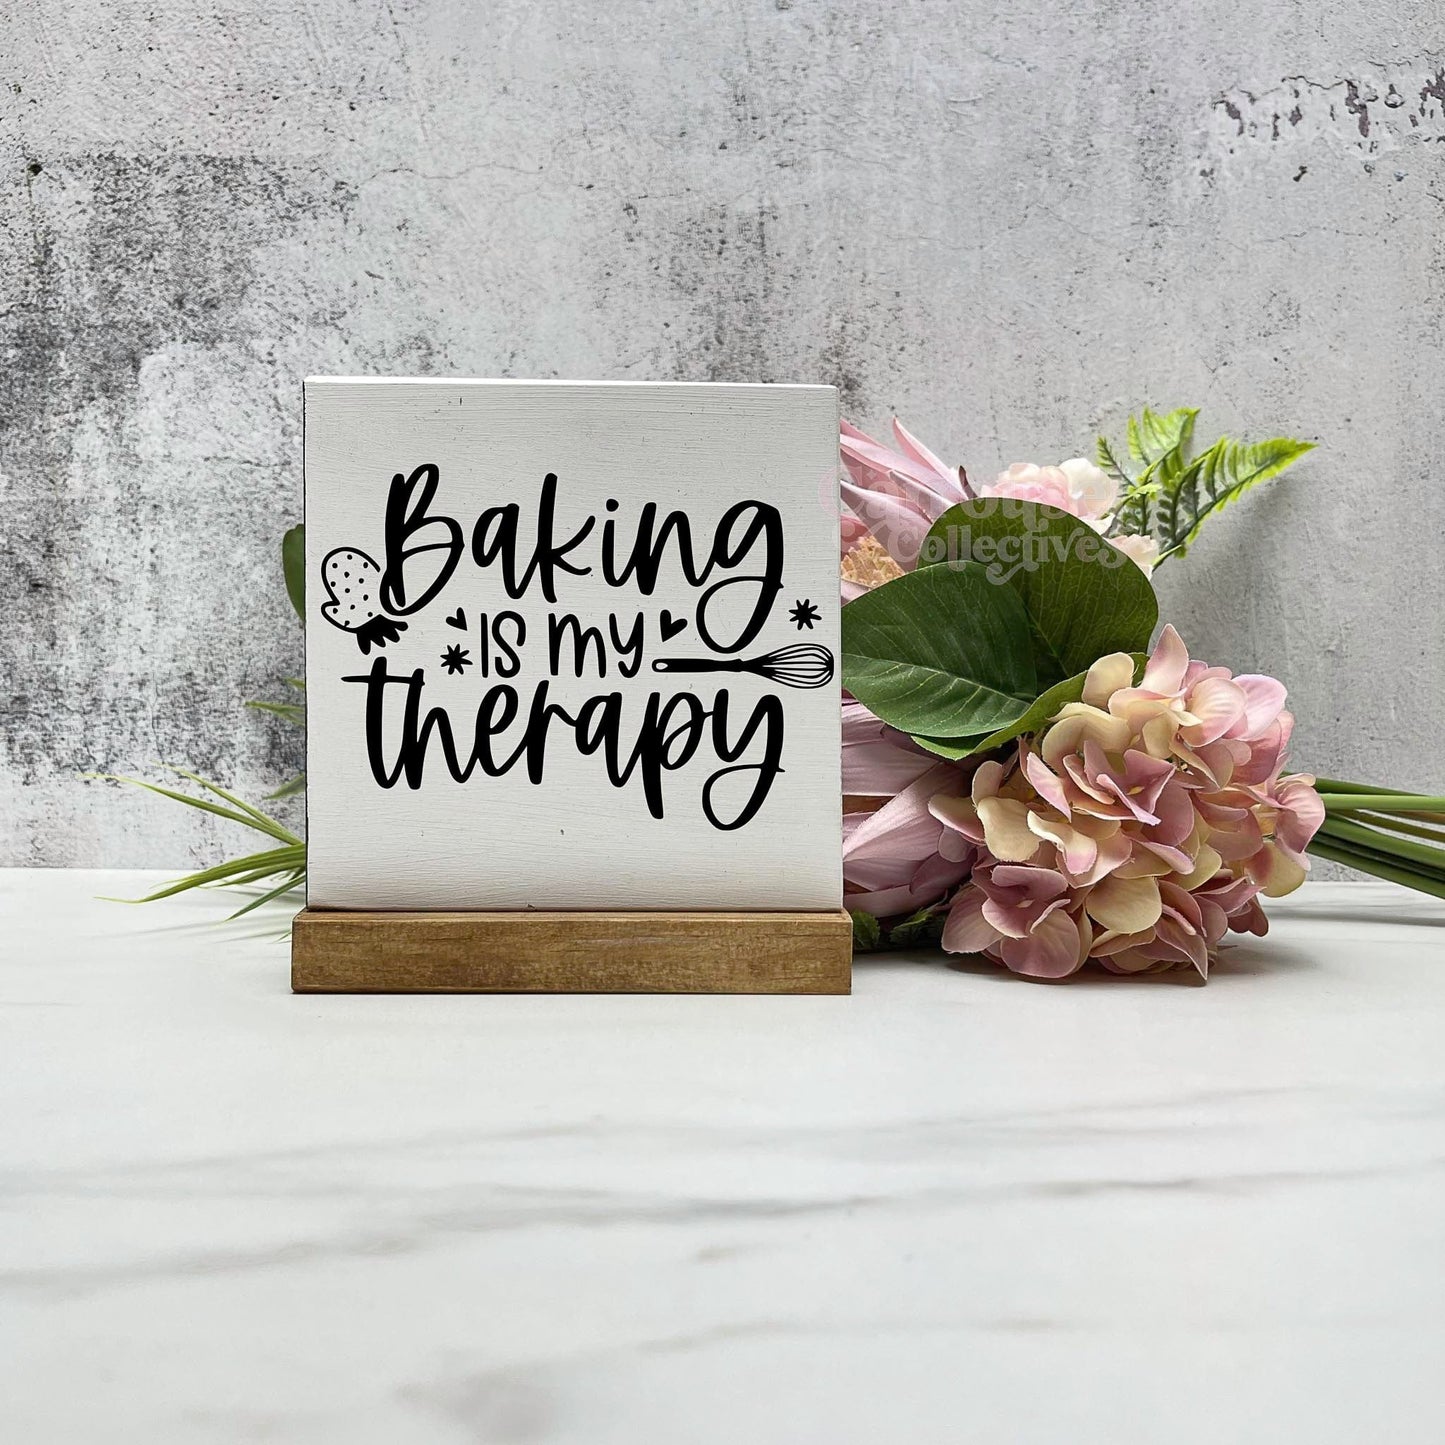 Baking is my therapy sign, kitchen wood sign, kitchen decor, home decor